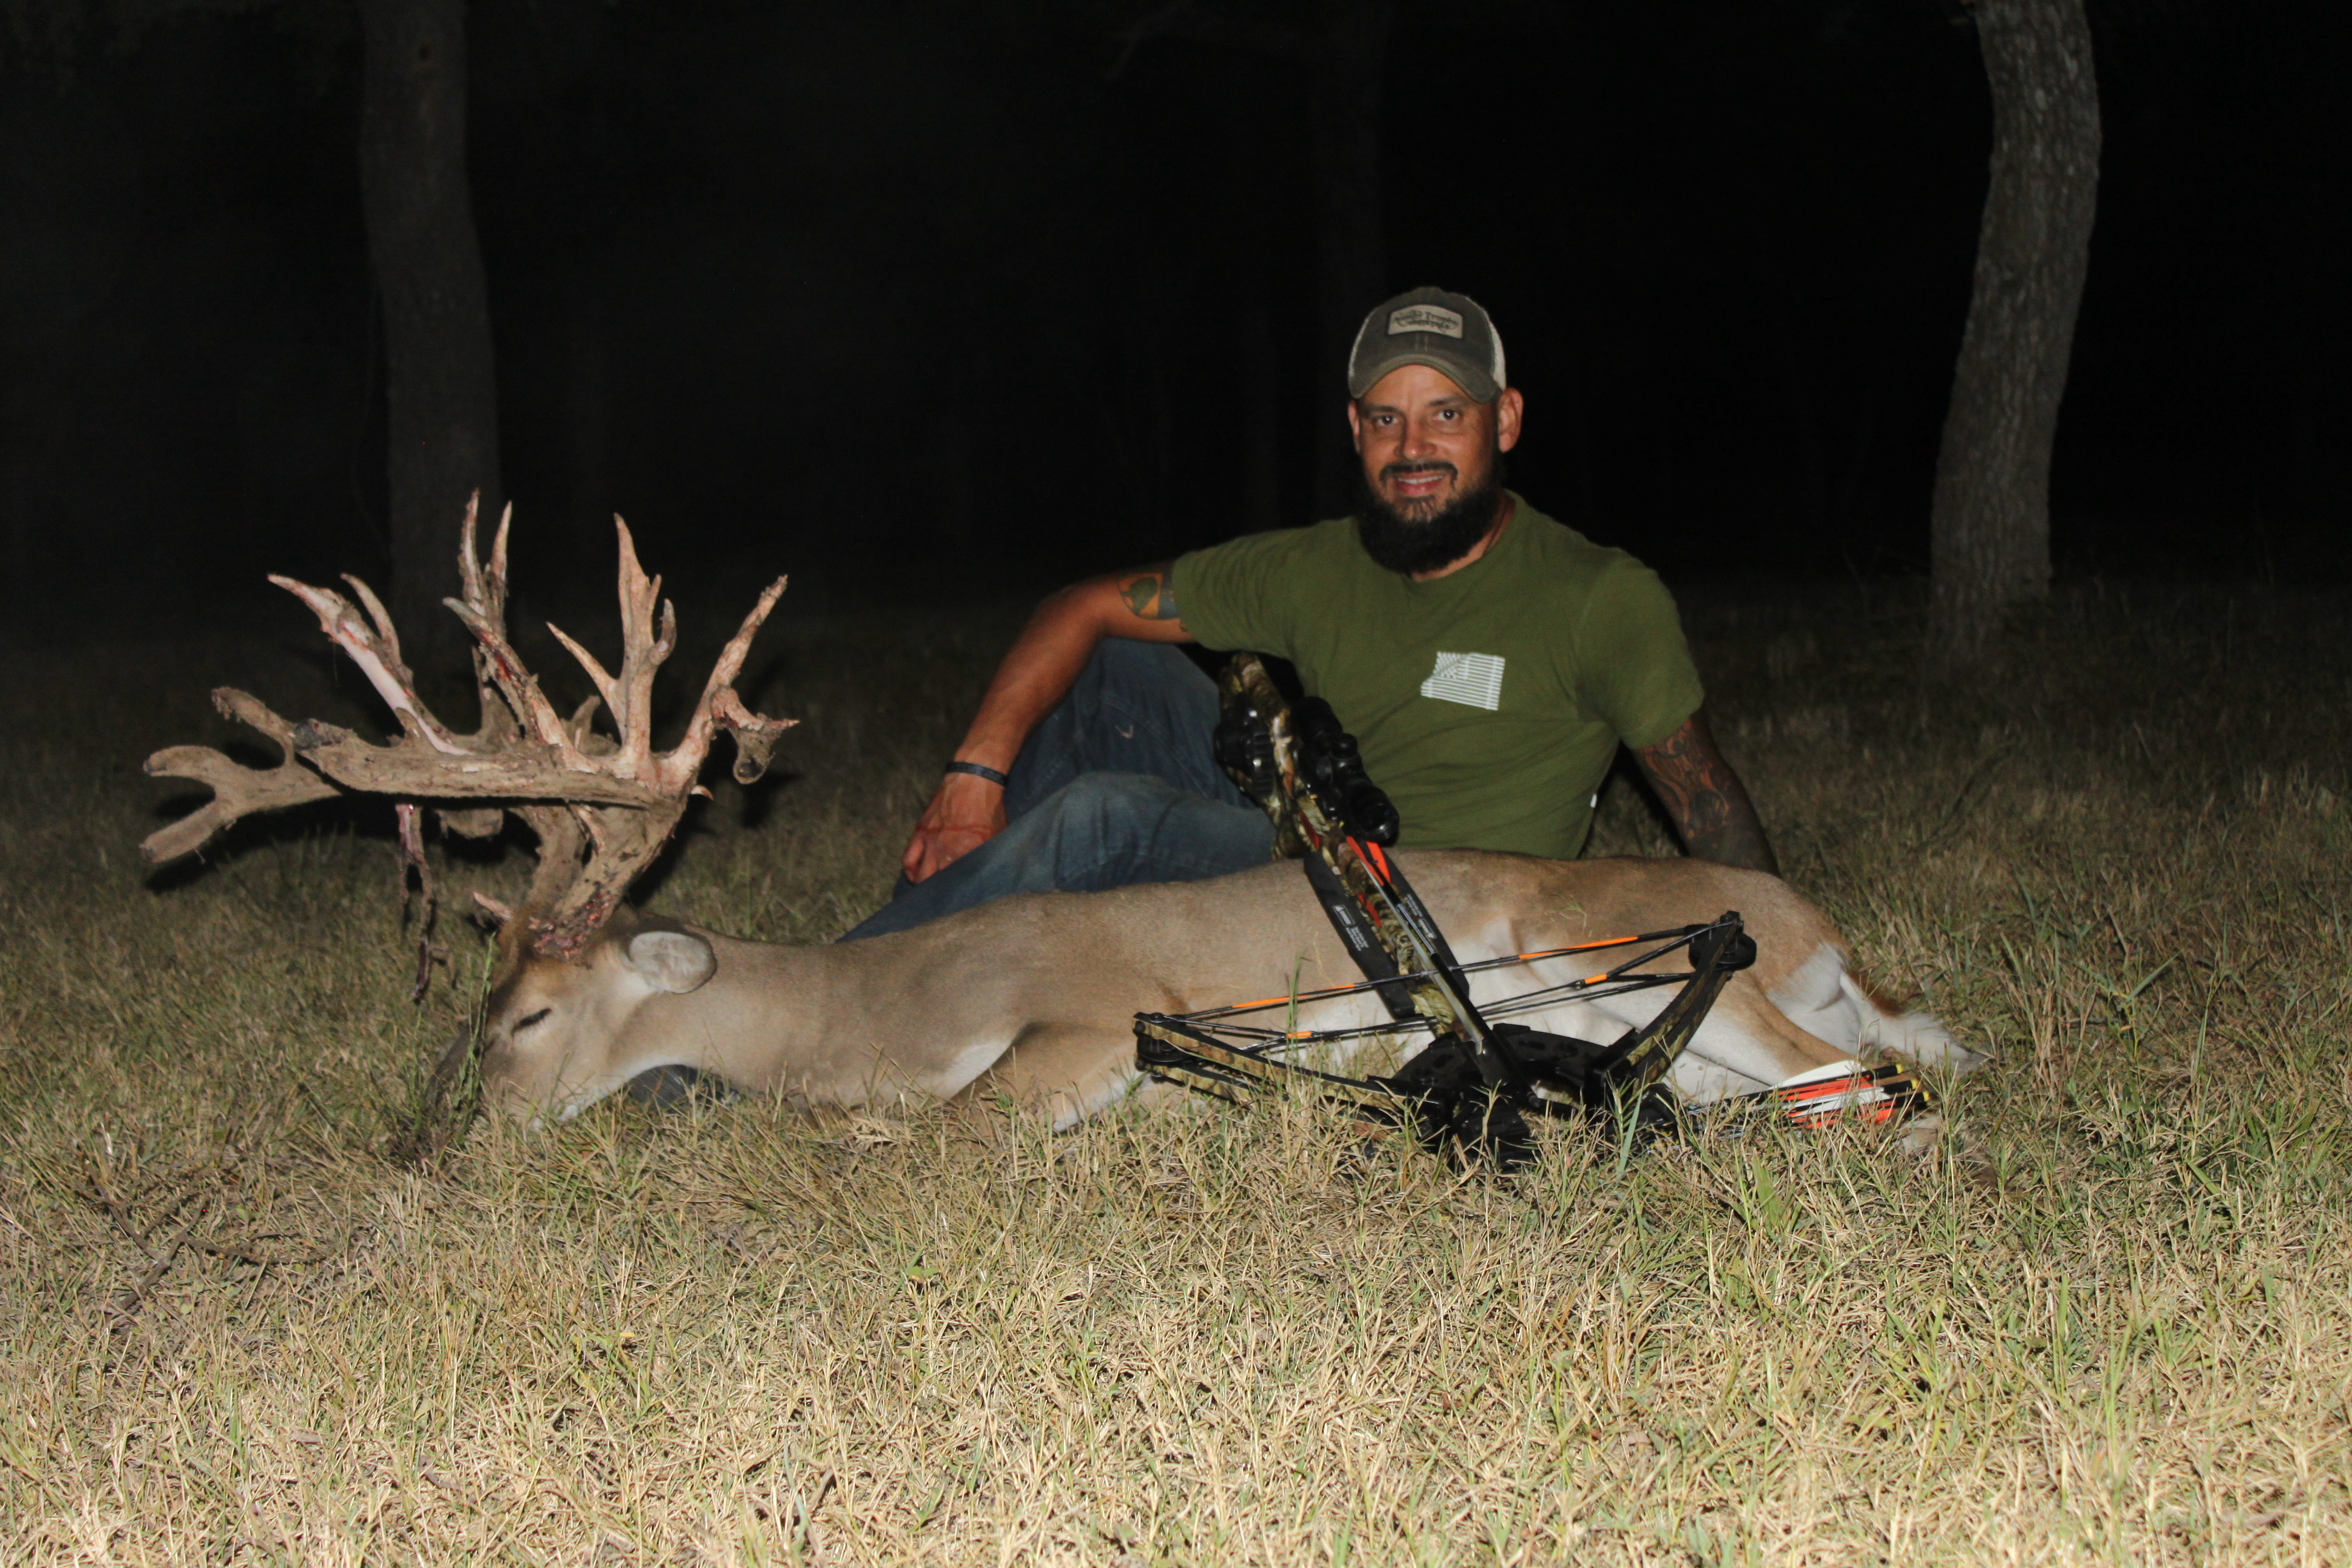 A hunter, Mo, with his trophy deer. Experienced an outstanding hunt on the ranch.